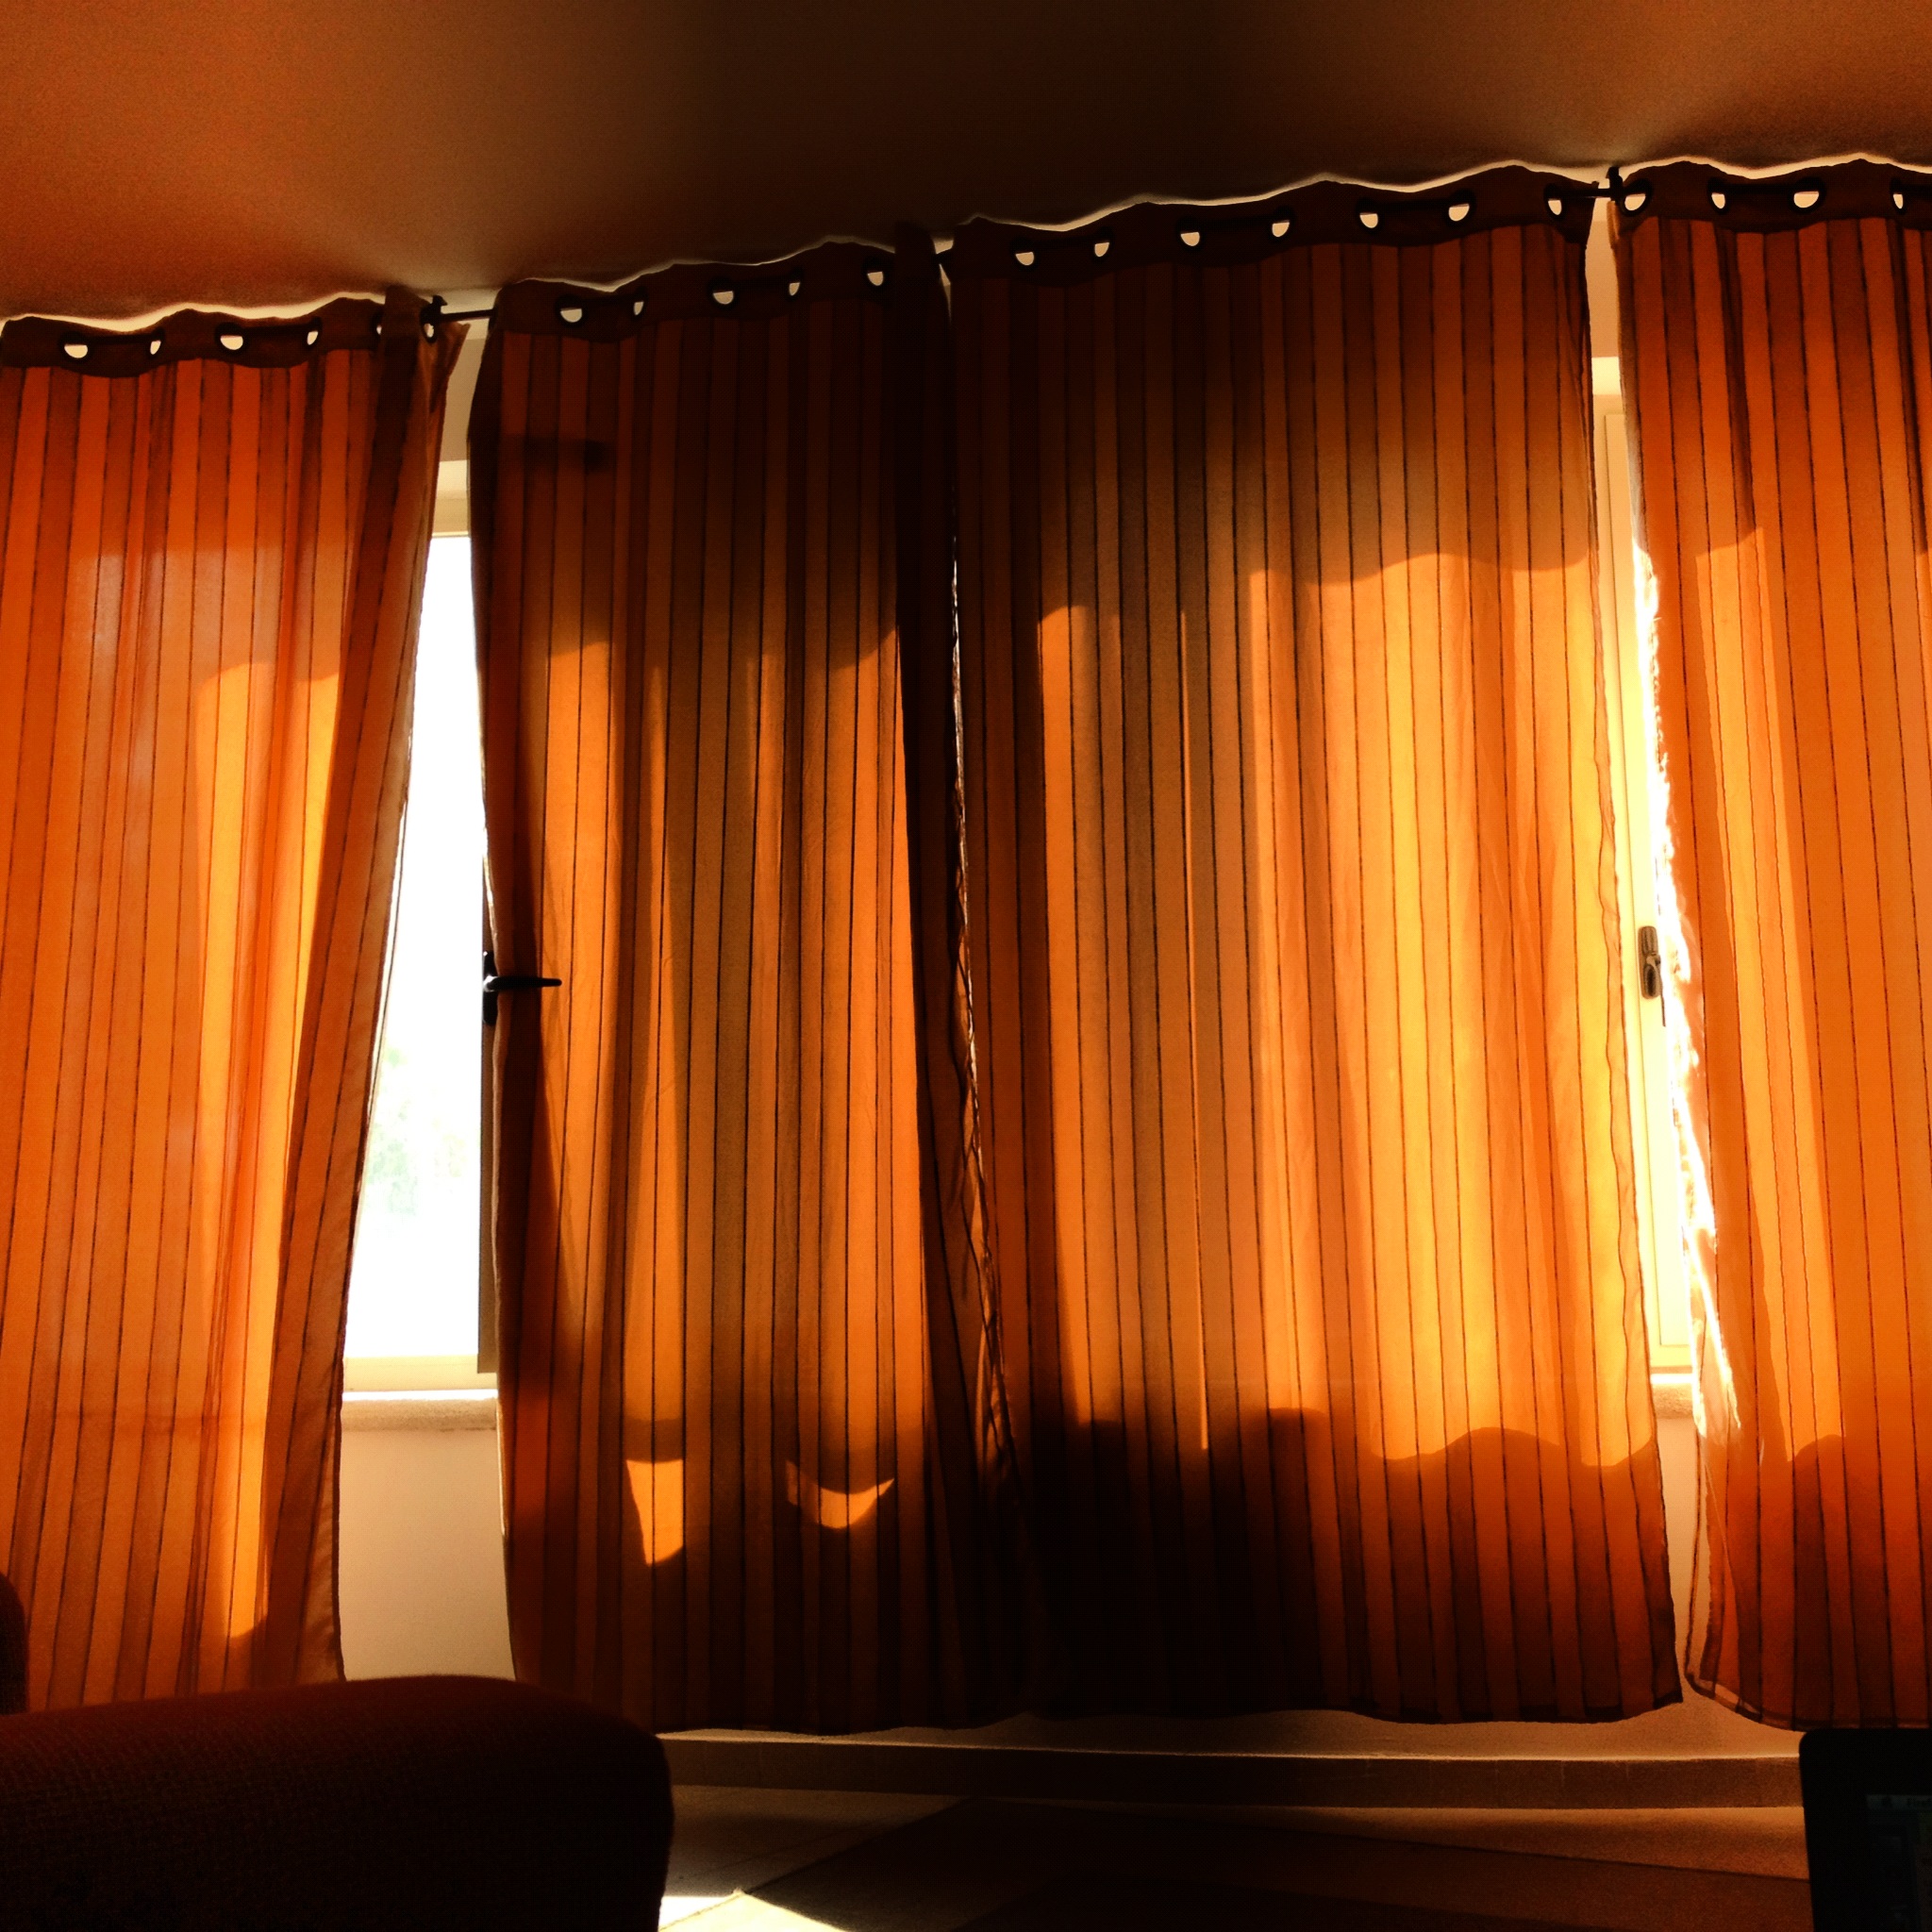 inspiration-curtains-sumptuous-sheer-sliding-orange-curtains-ceiling-to-floor-drapery-windows-treatments-in-modern-living-areas-accesories-decorating-designs-orange-curtains-for-snazzy-window-treatm